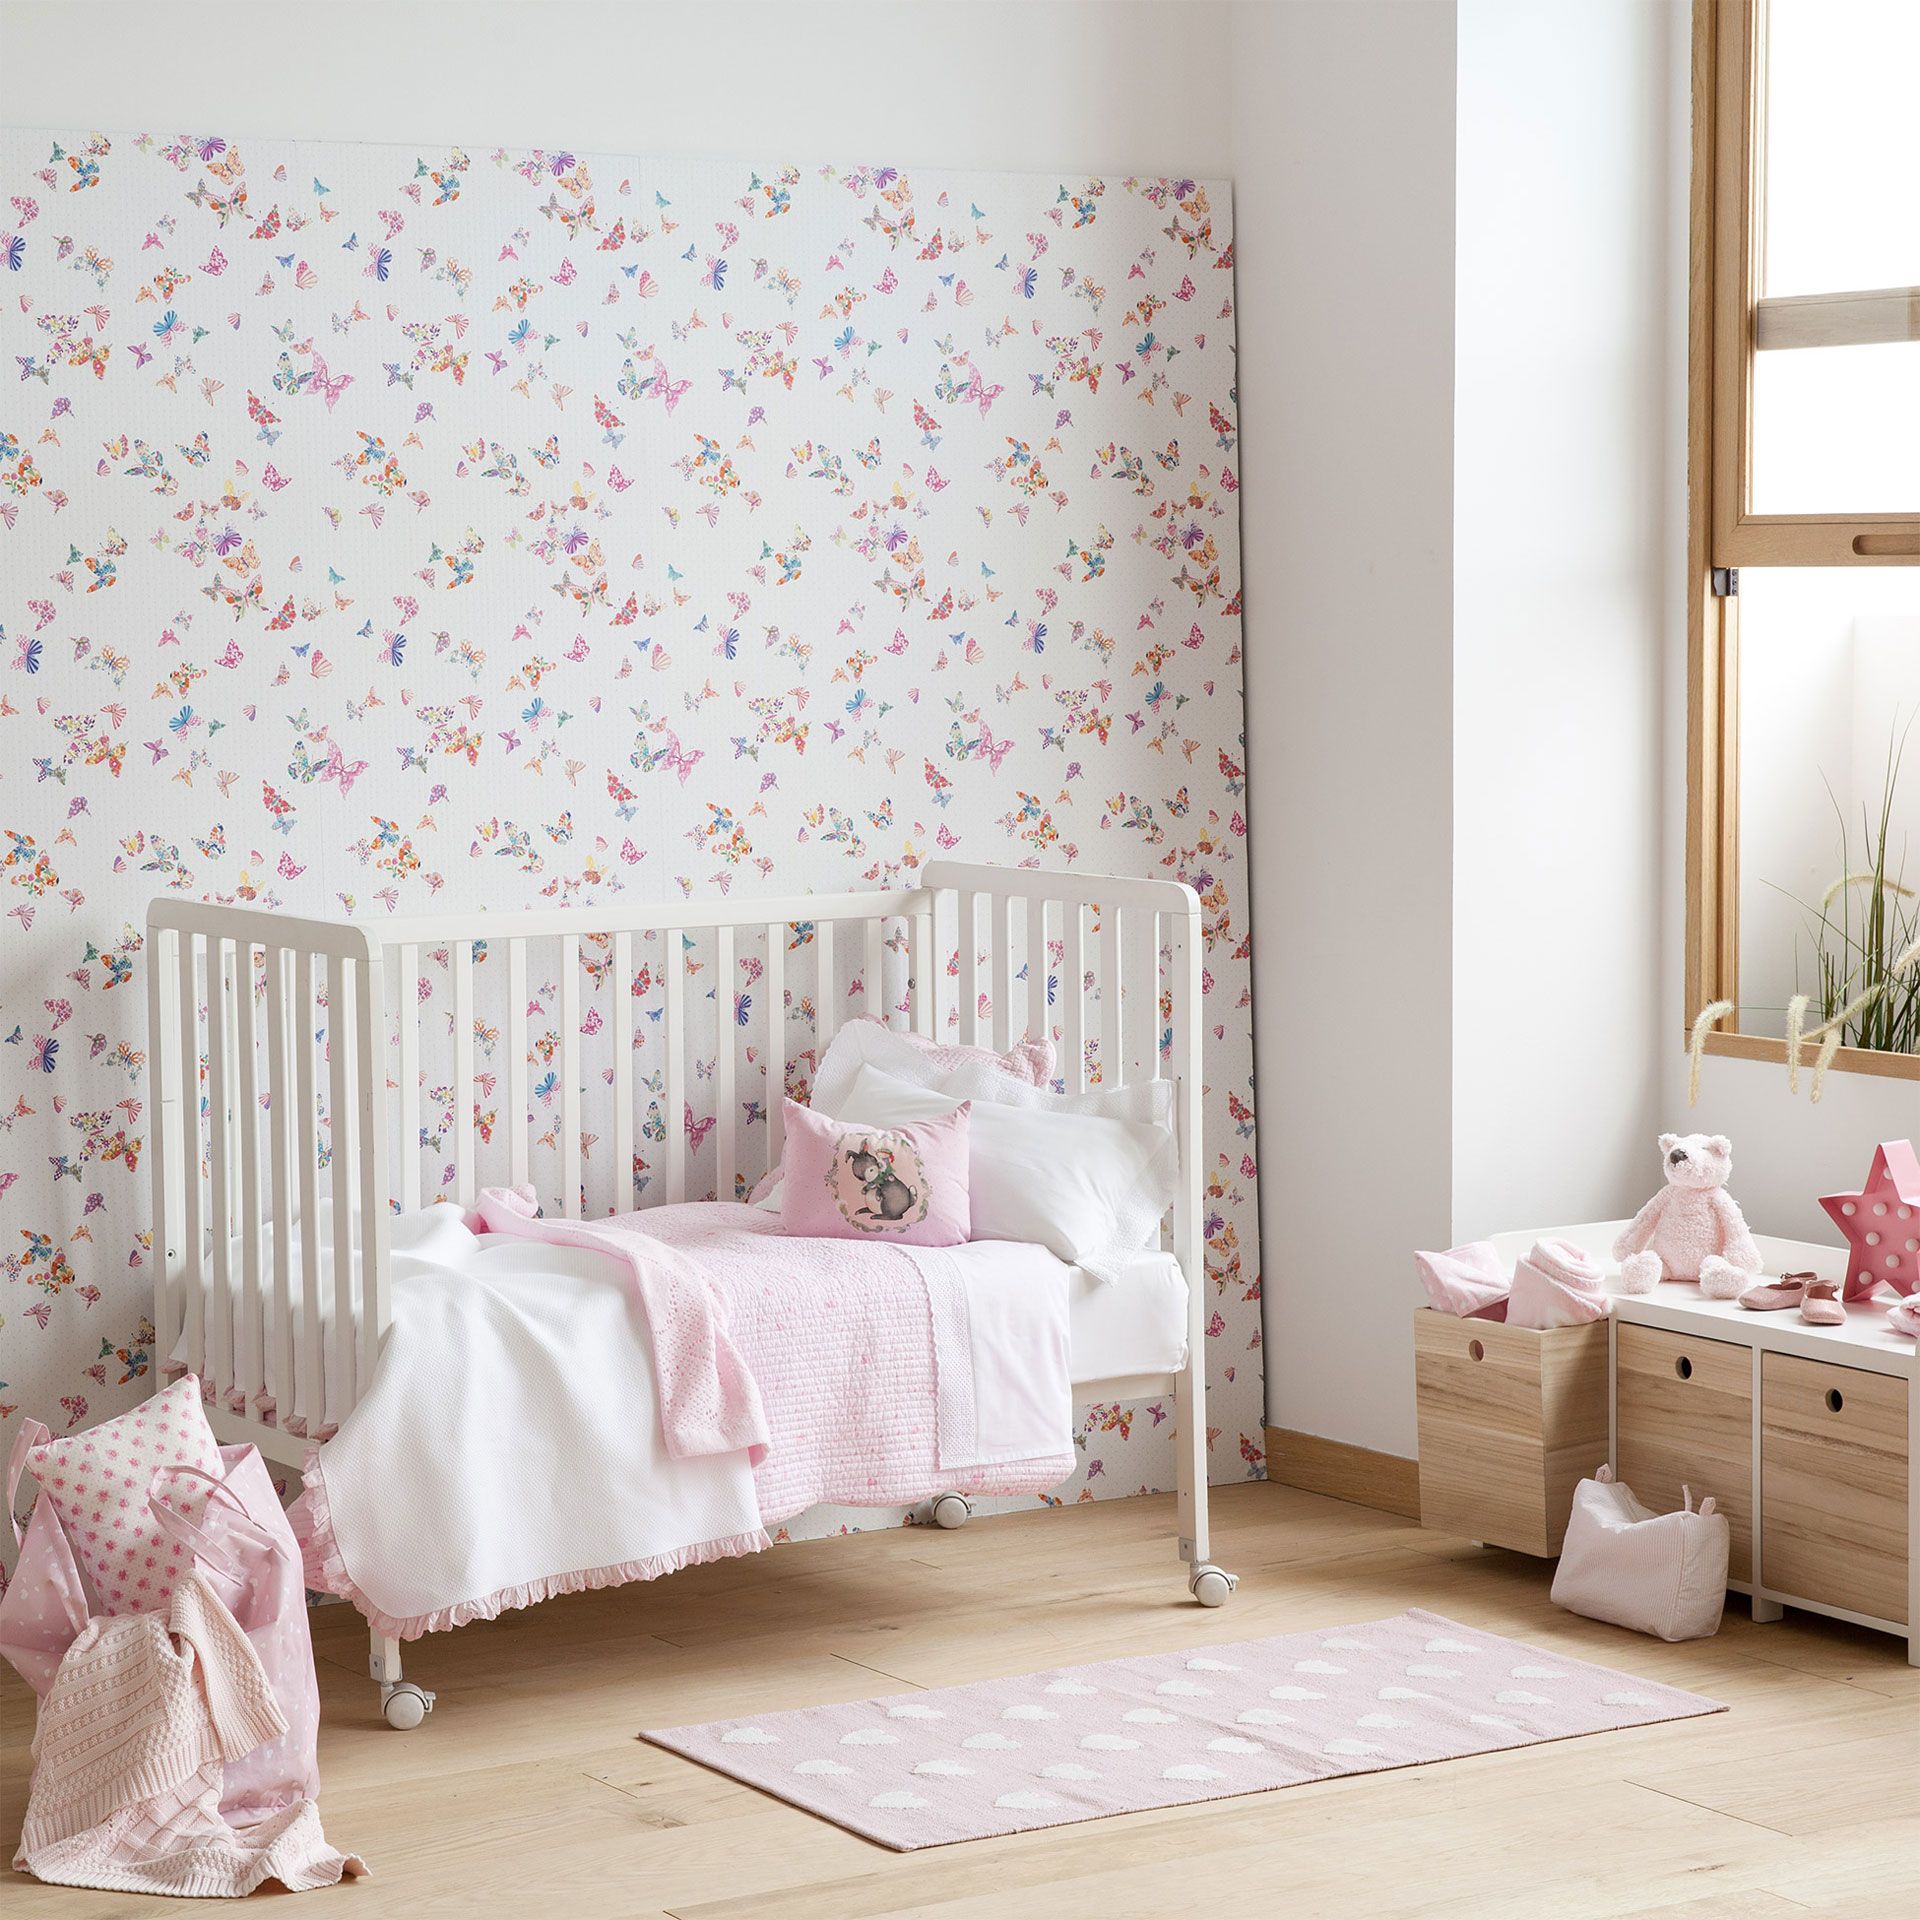 zara home wallpaper,furniture,product,pink,room,wall